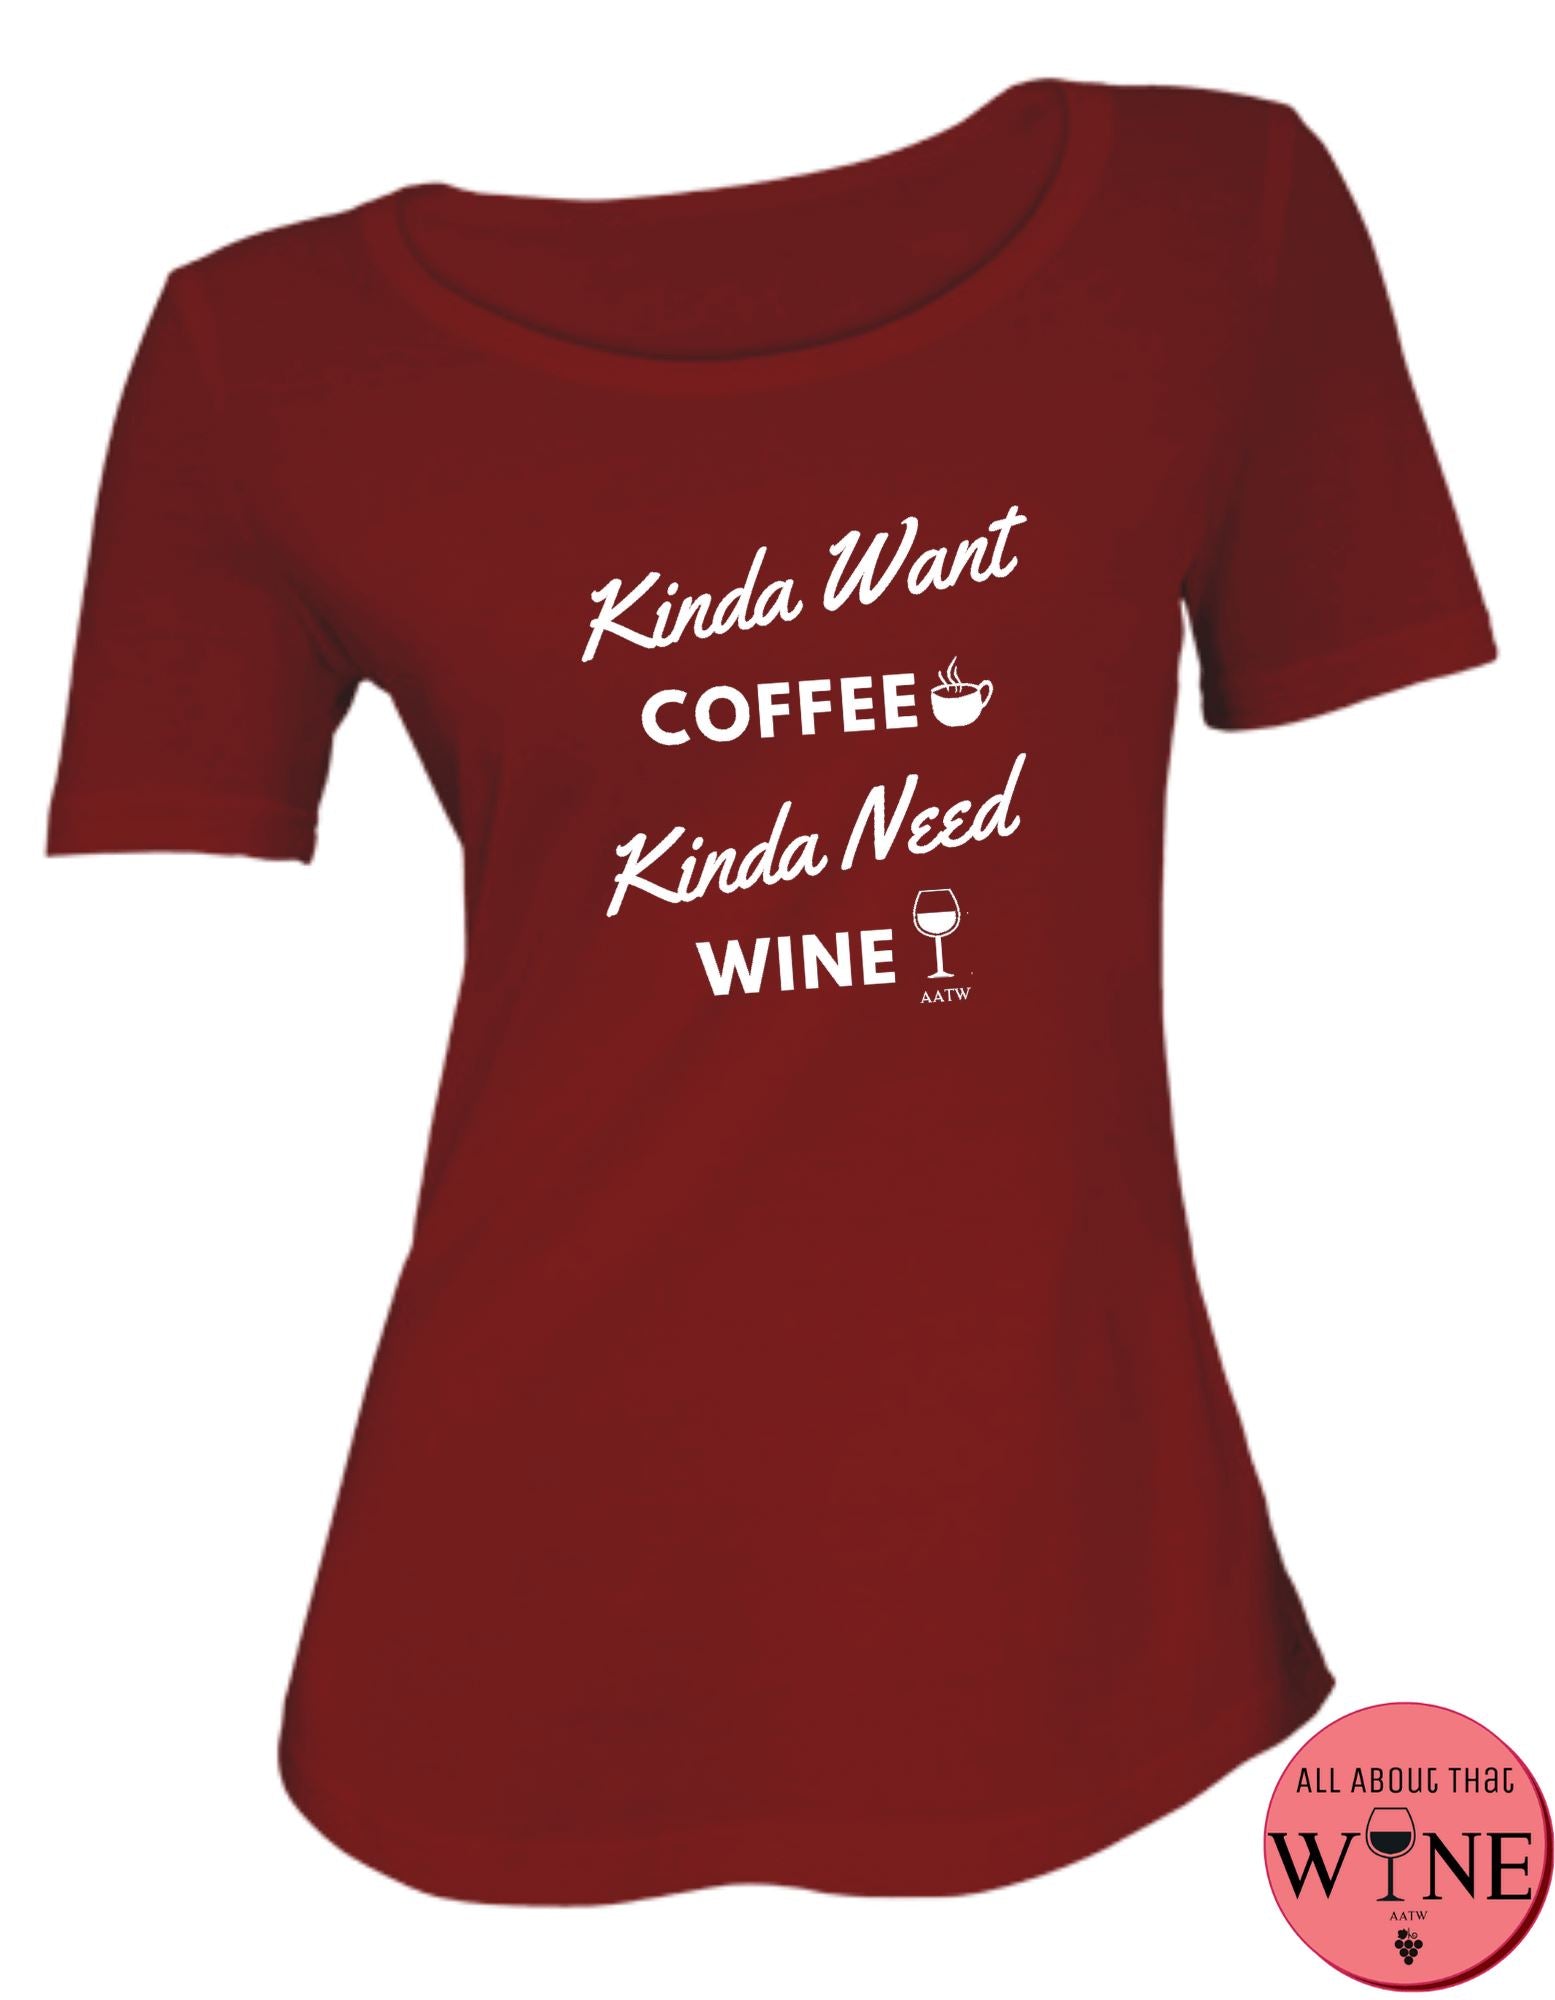 Kinda Want Coffee S Deep red with white